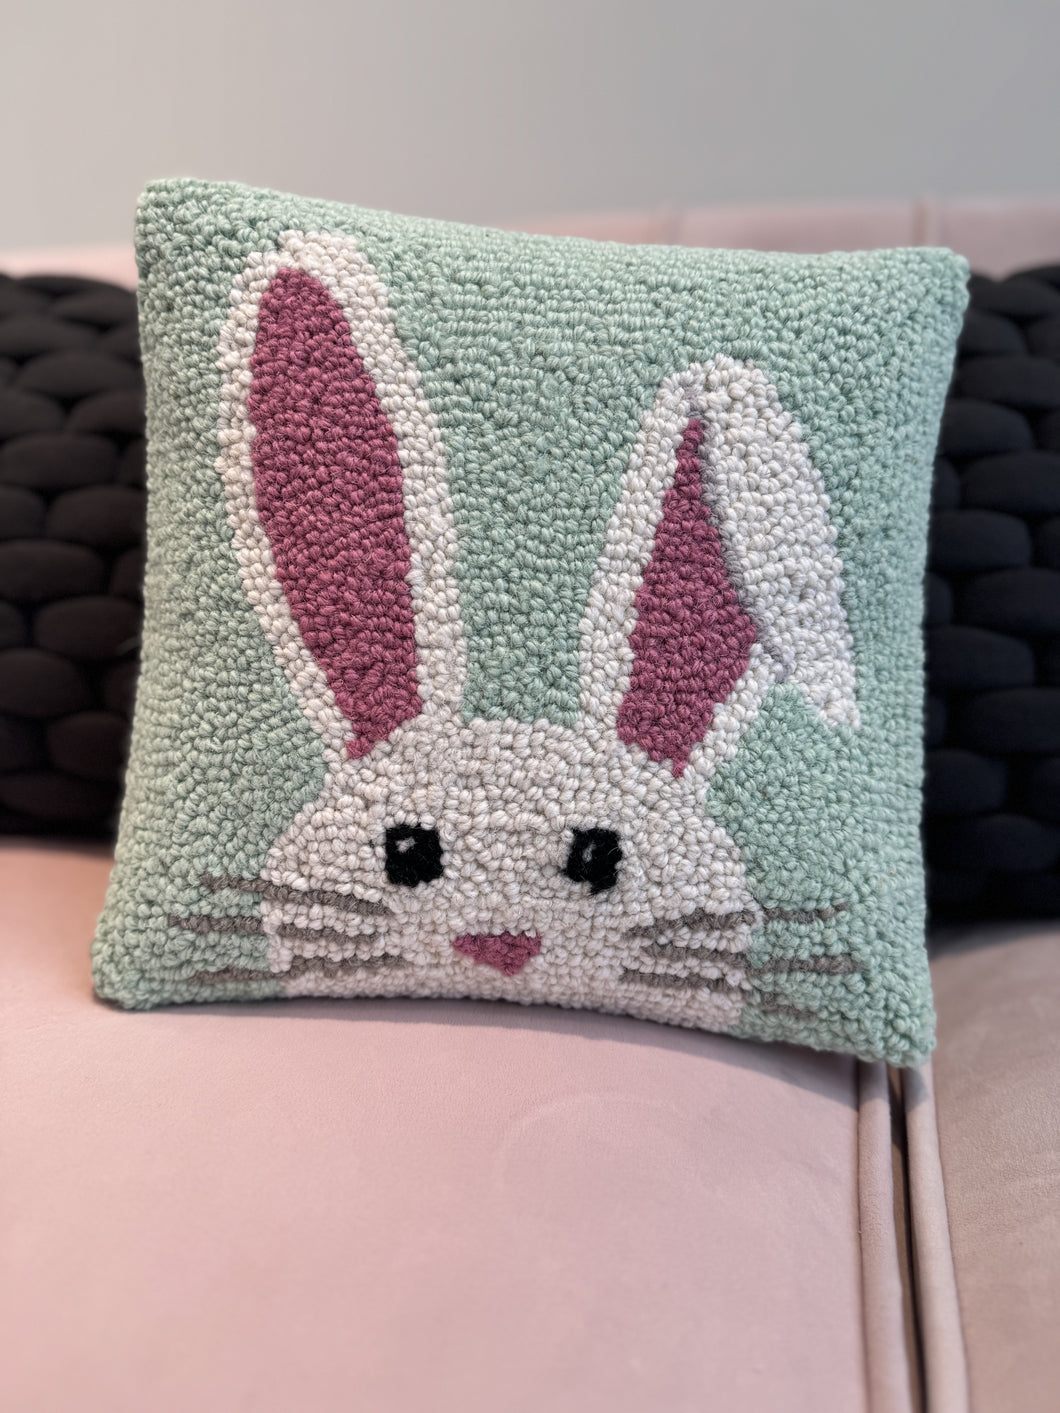 Square throw pillow featuring a hand-hooked wool bunny design on soft velvet backing.